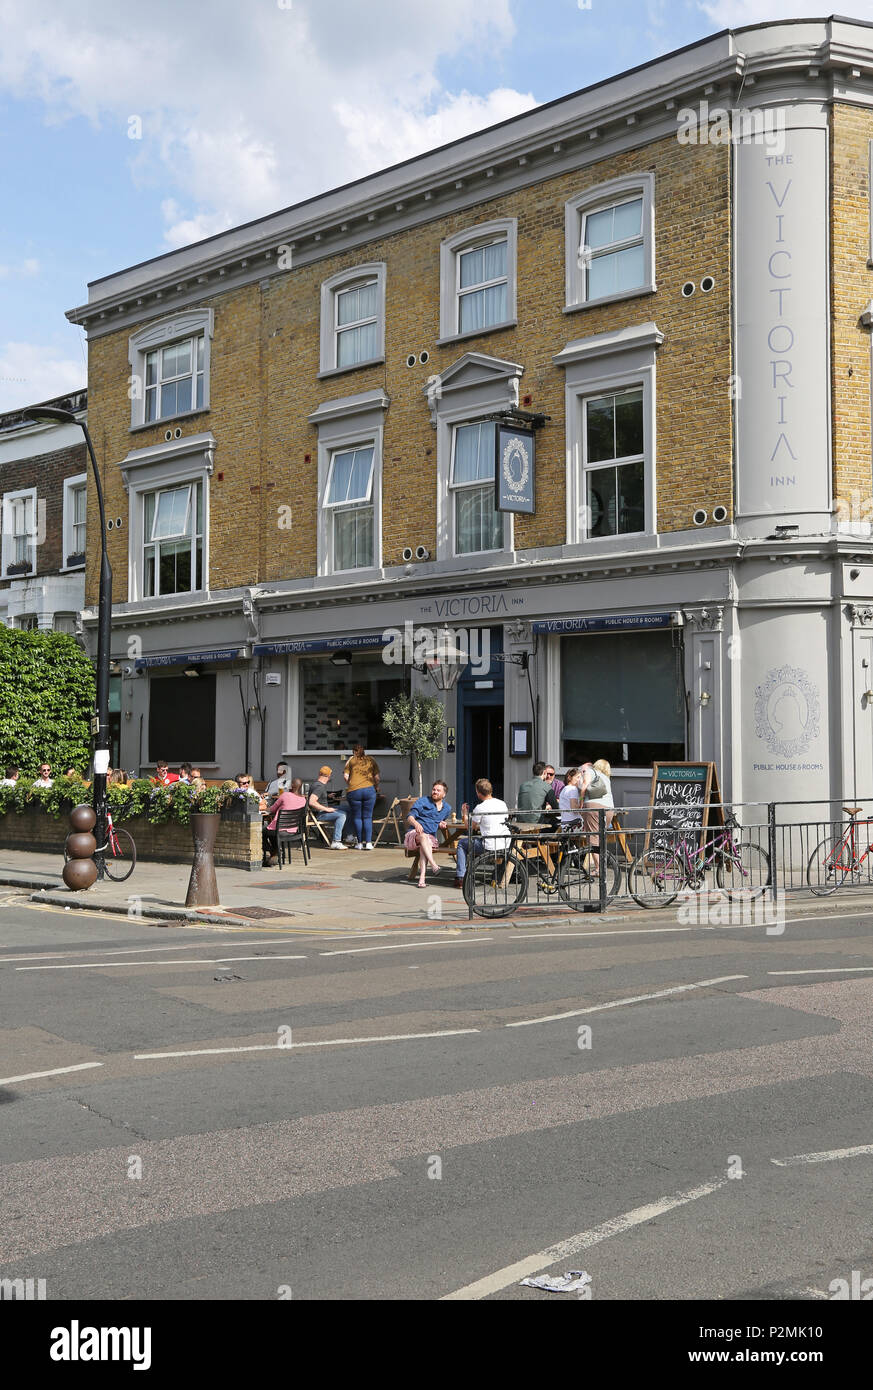 The Victoria Inn on Peckham's Bellenden Road, London. Shown on a summer evening with customers sitting outside enjoying the sunshine. Stock Photo